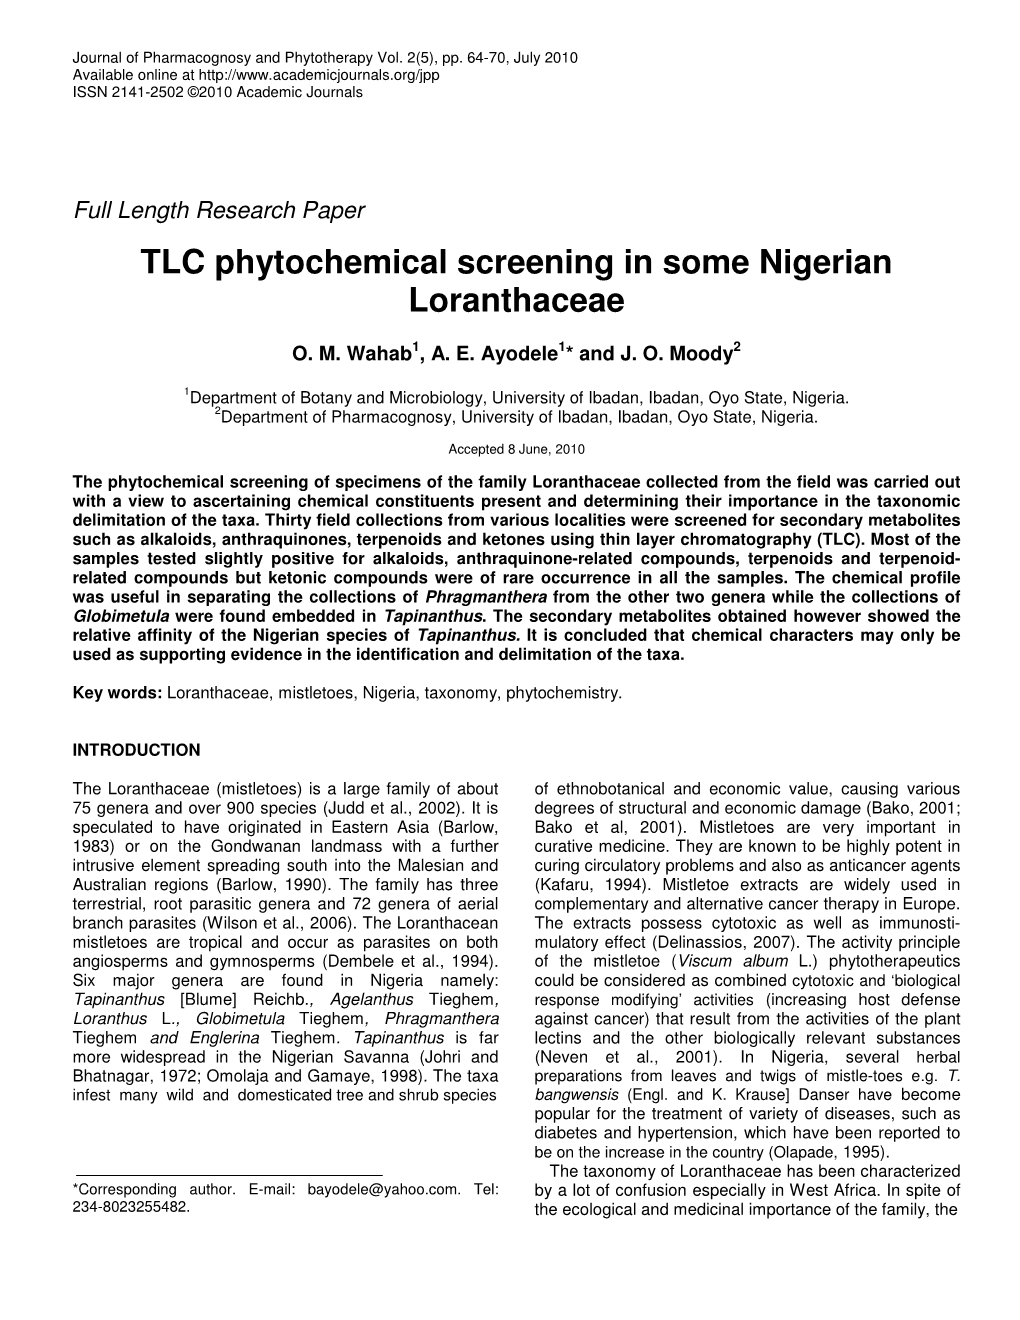 TLC Phytochemical Screening in Some Nigerian Loranthaceae